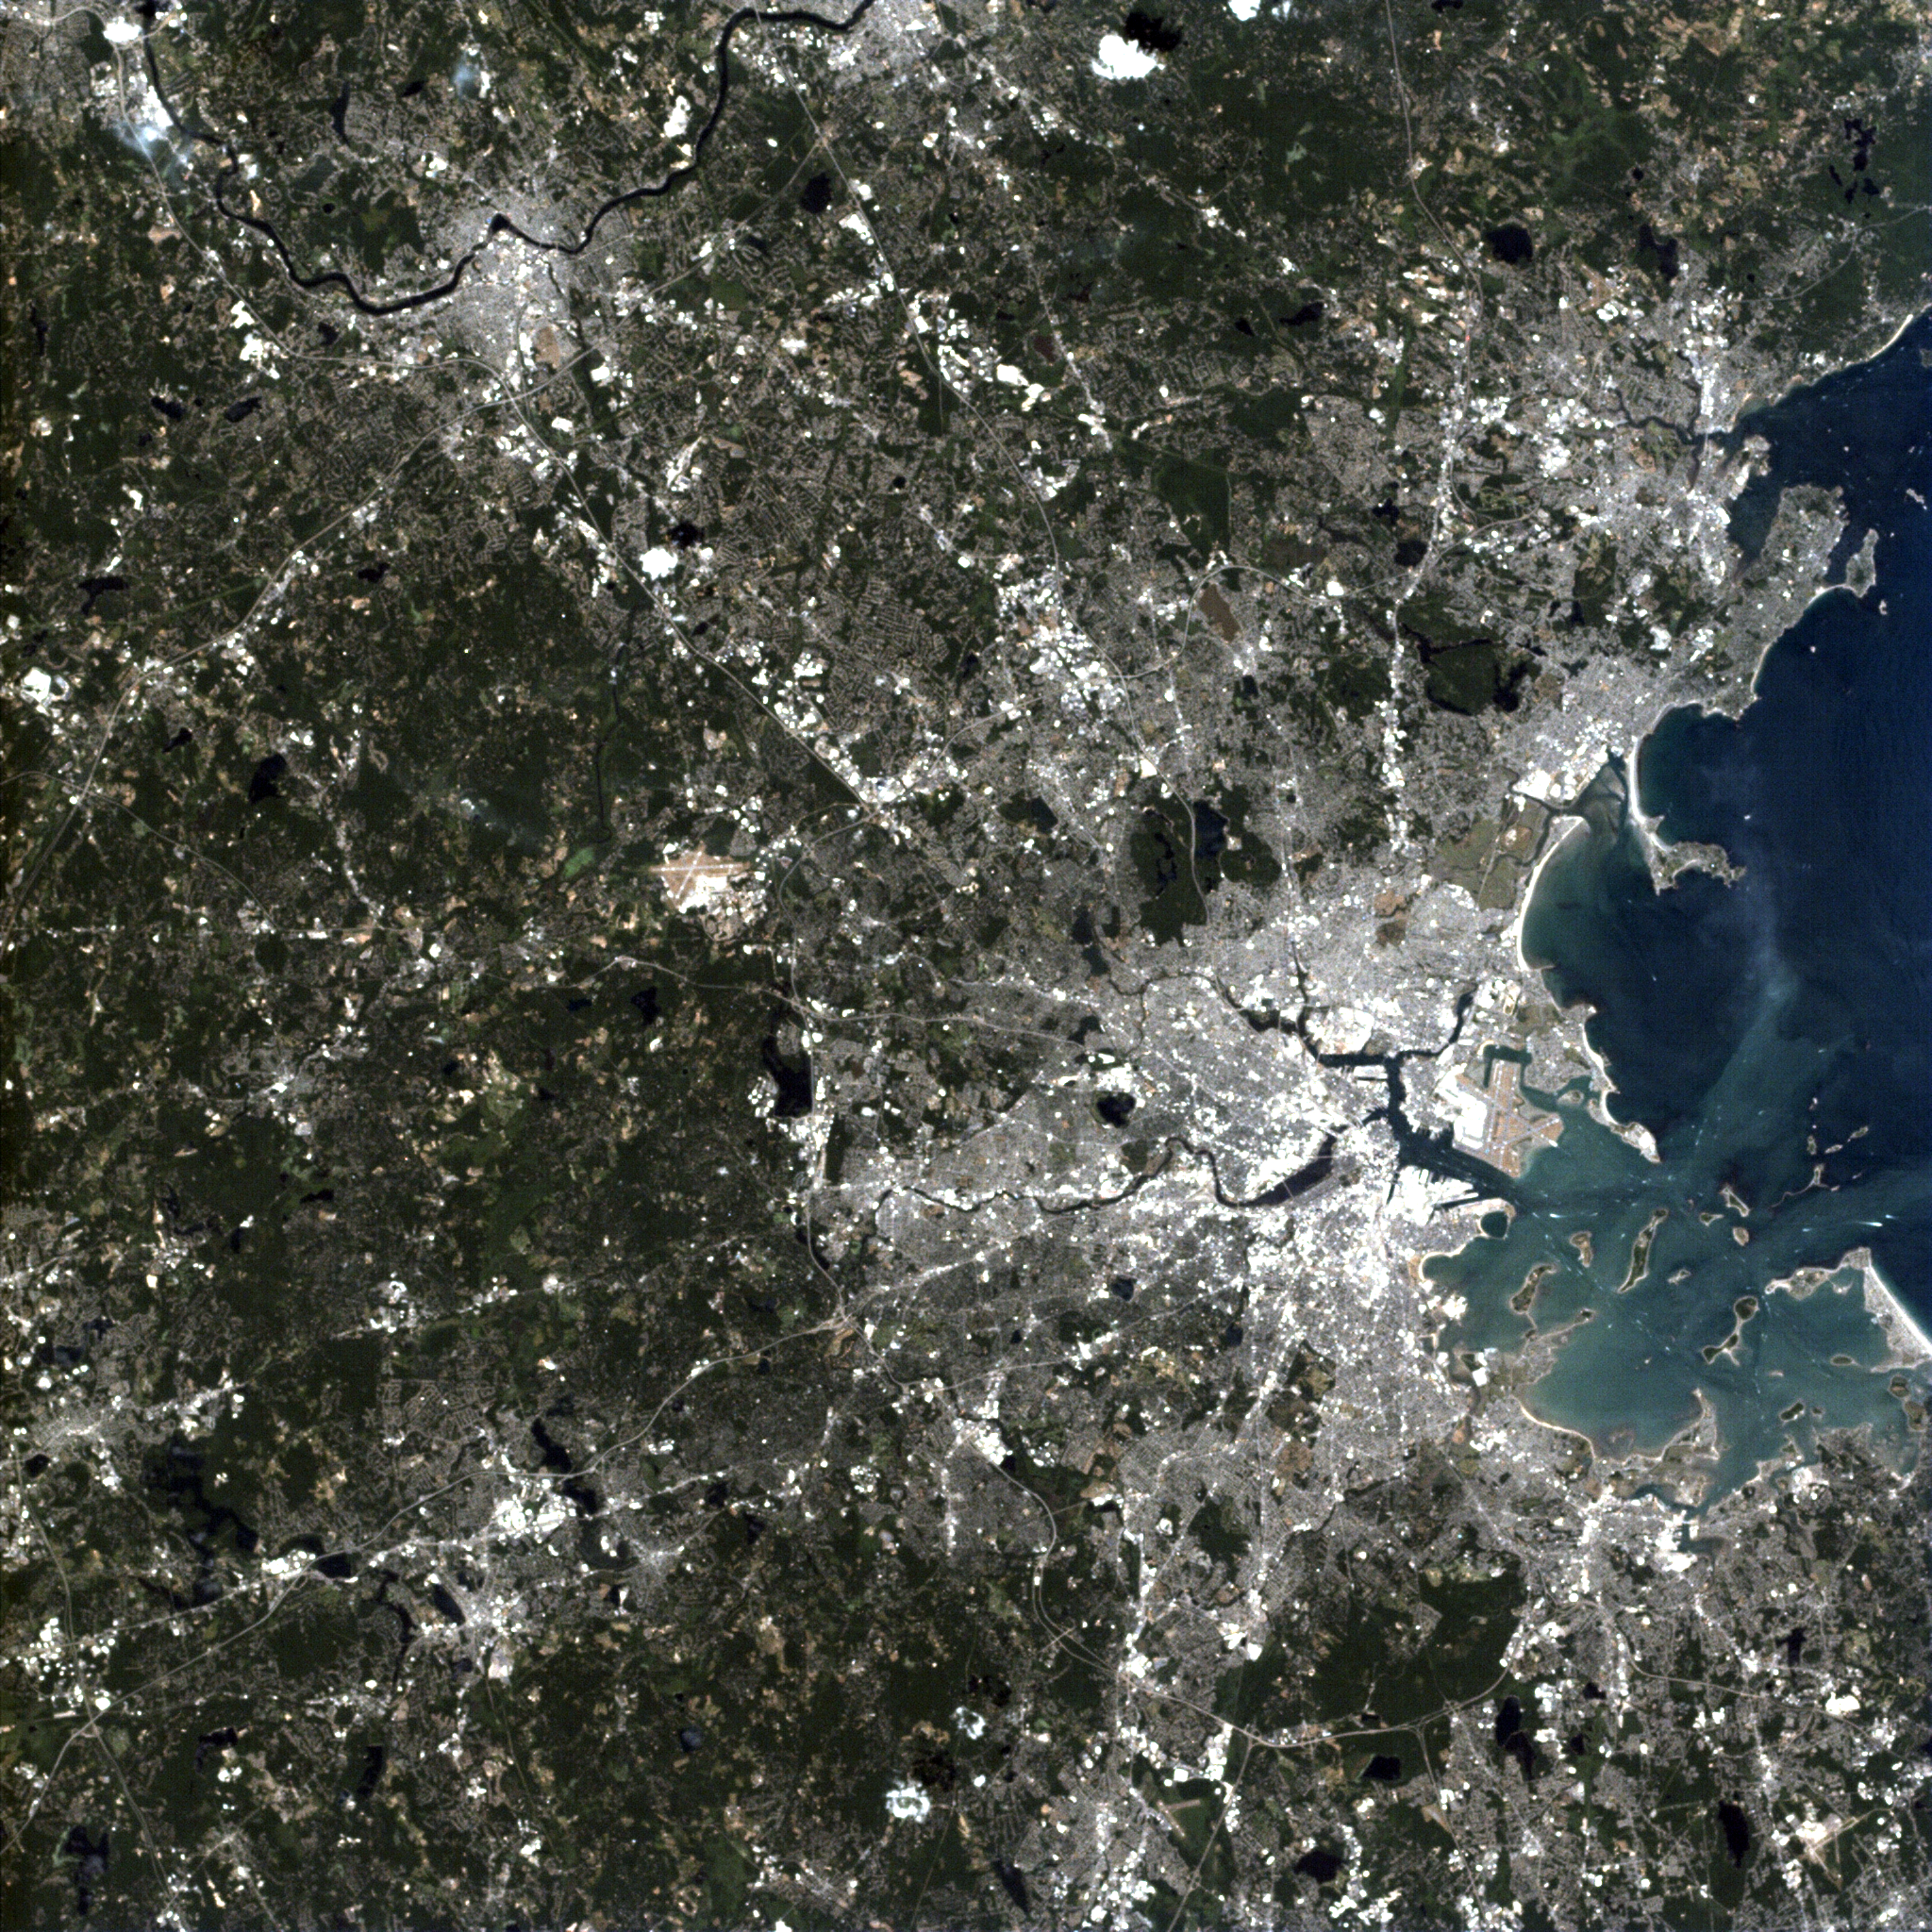 AMS took a photo of Boston on July 10. Hanscom Air Force Base can be seen northwest of the city center and the Haystack Observatory is further to the west.